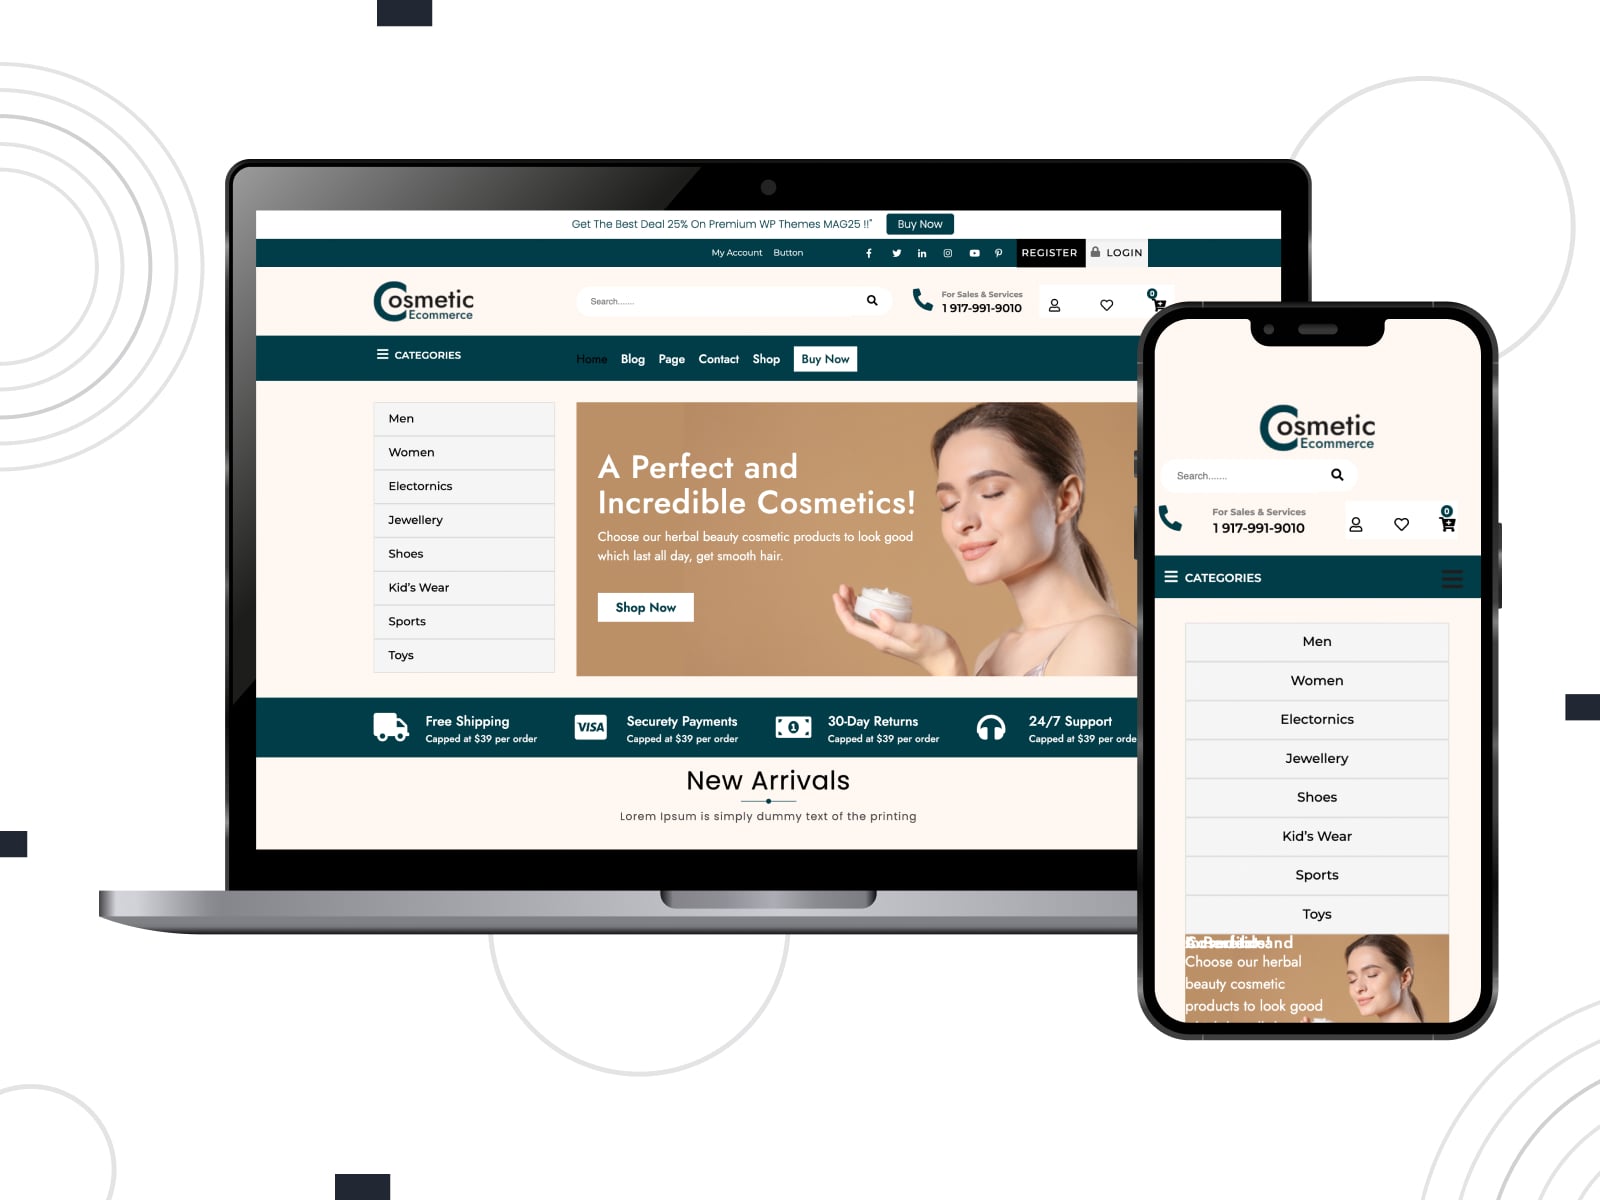 Figure of Cosmetic Ecommerce Store, a free responsive eCommerce WordPress theme with a built-in search engine.